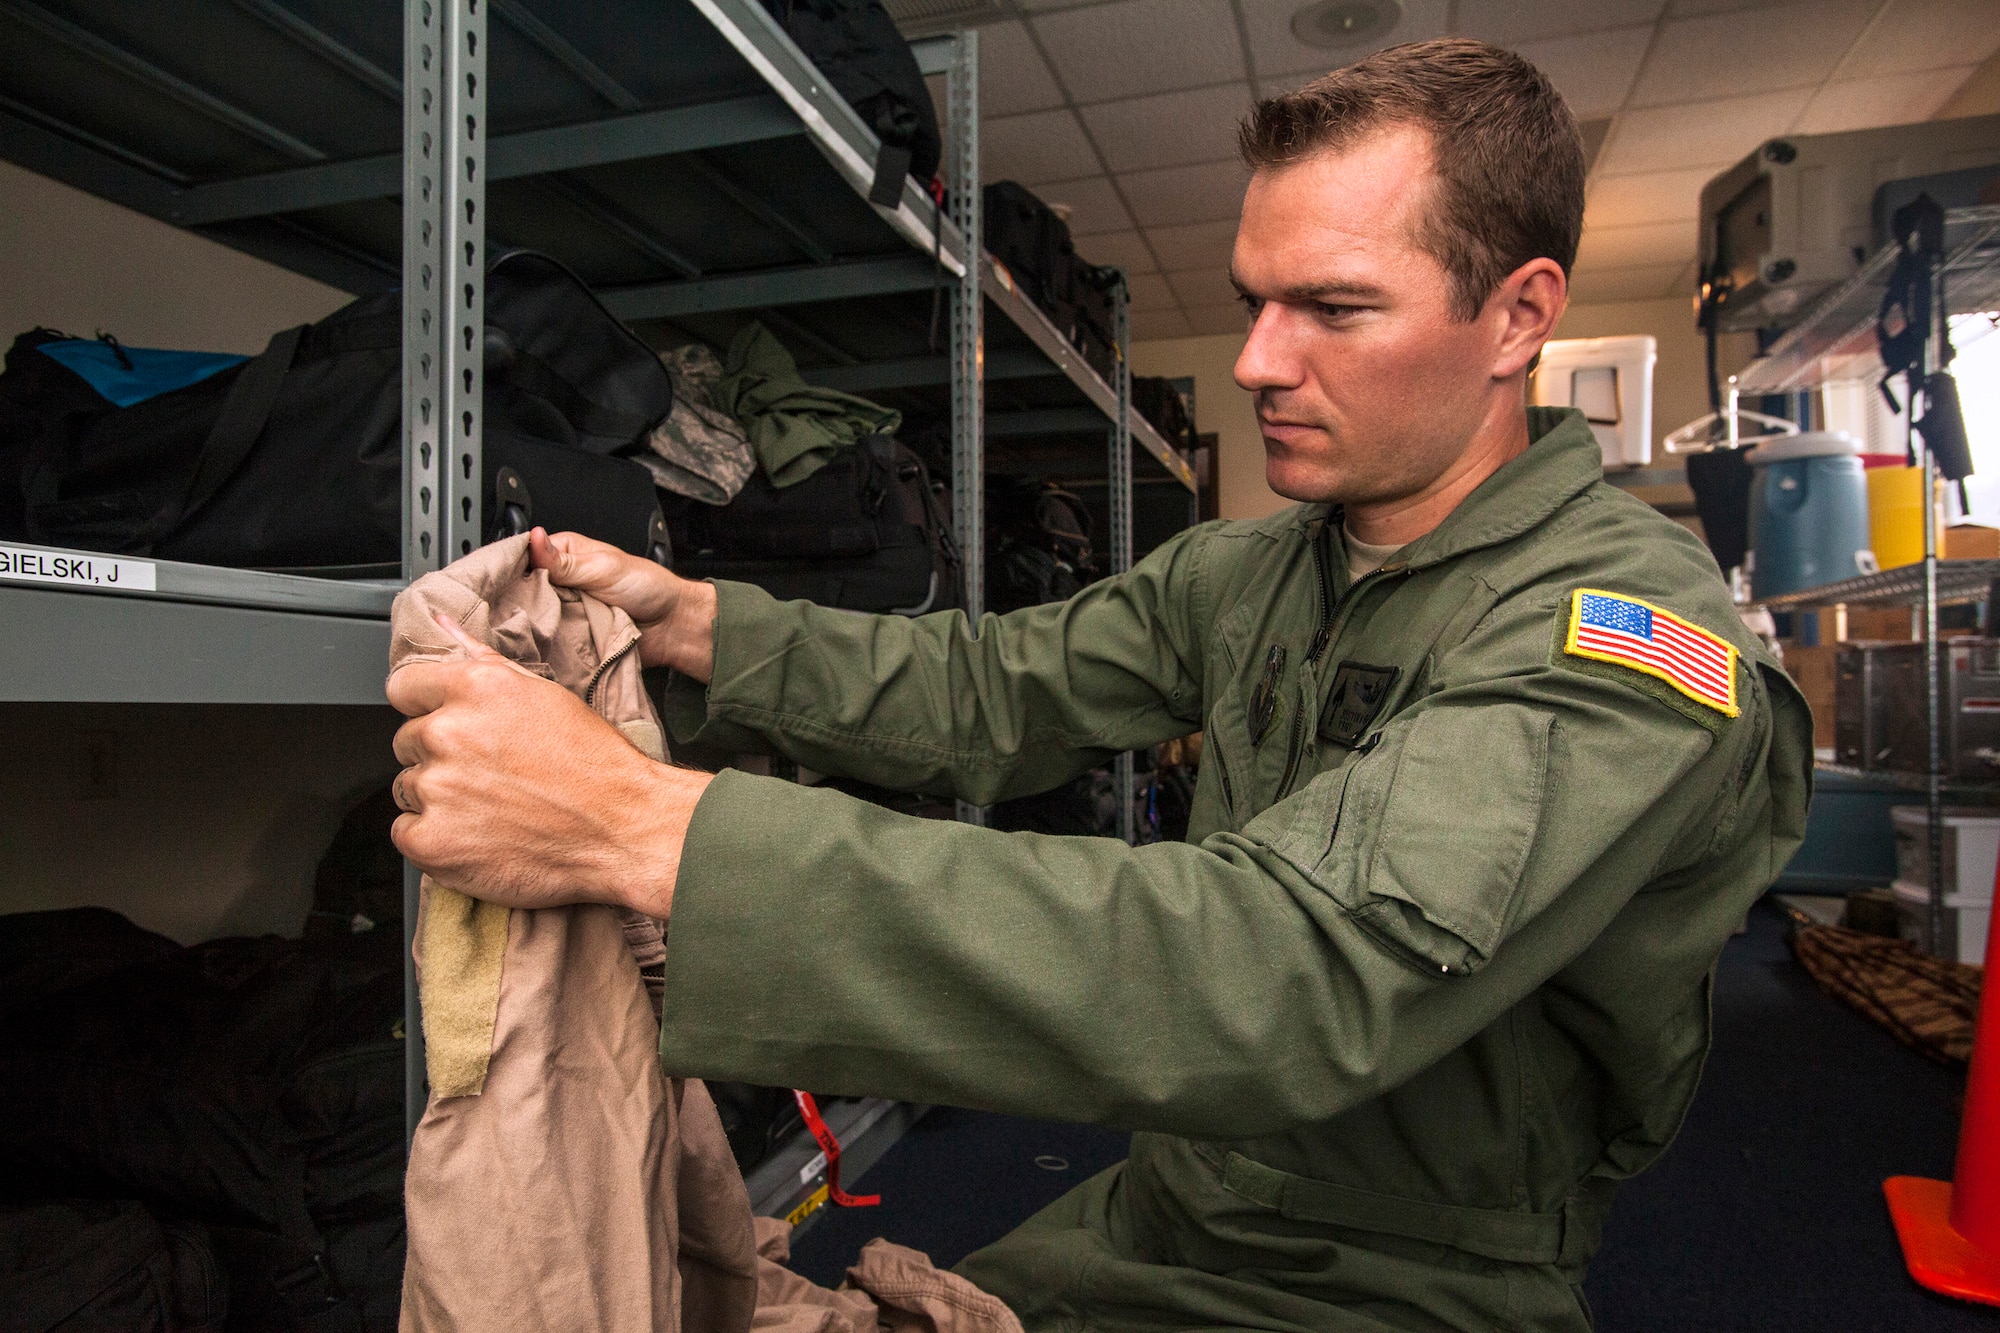 Tech. Sgt. Justin B. Gielski, a loadmaster with the 150th Special Operations Squadron, 108th Wing, New Jersey Air National Guard, checks his deployment bag at Joint Base McGuire-Dix-Lakehurst, N.J., Aug. 19, 2015. Gielski placed fifth in the all-military city final on the TV show “American Ninja Warrior” and advanced to the finals in Las Vegas. (U.S. Air National Guard photo by Master Sgt. Mark C. Olsen/Released)